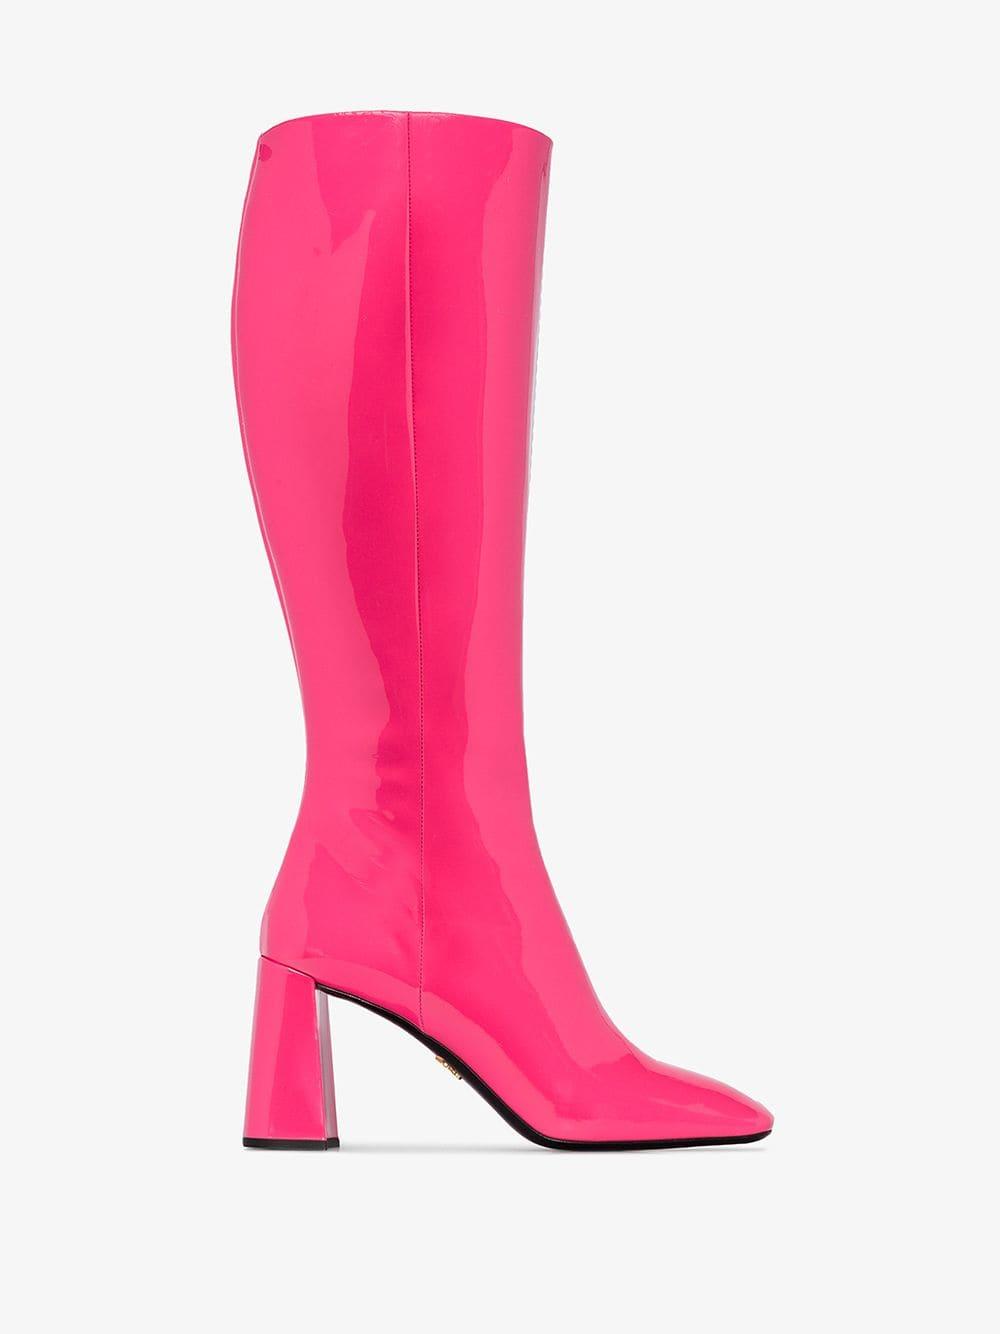 Prada Leather Knee High Boots in Pink,Fuchsia (Pink) | Lyst